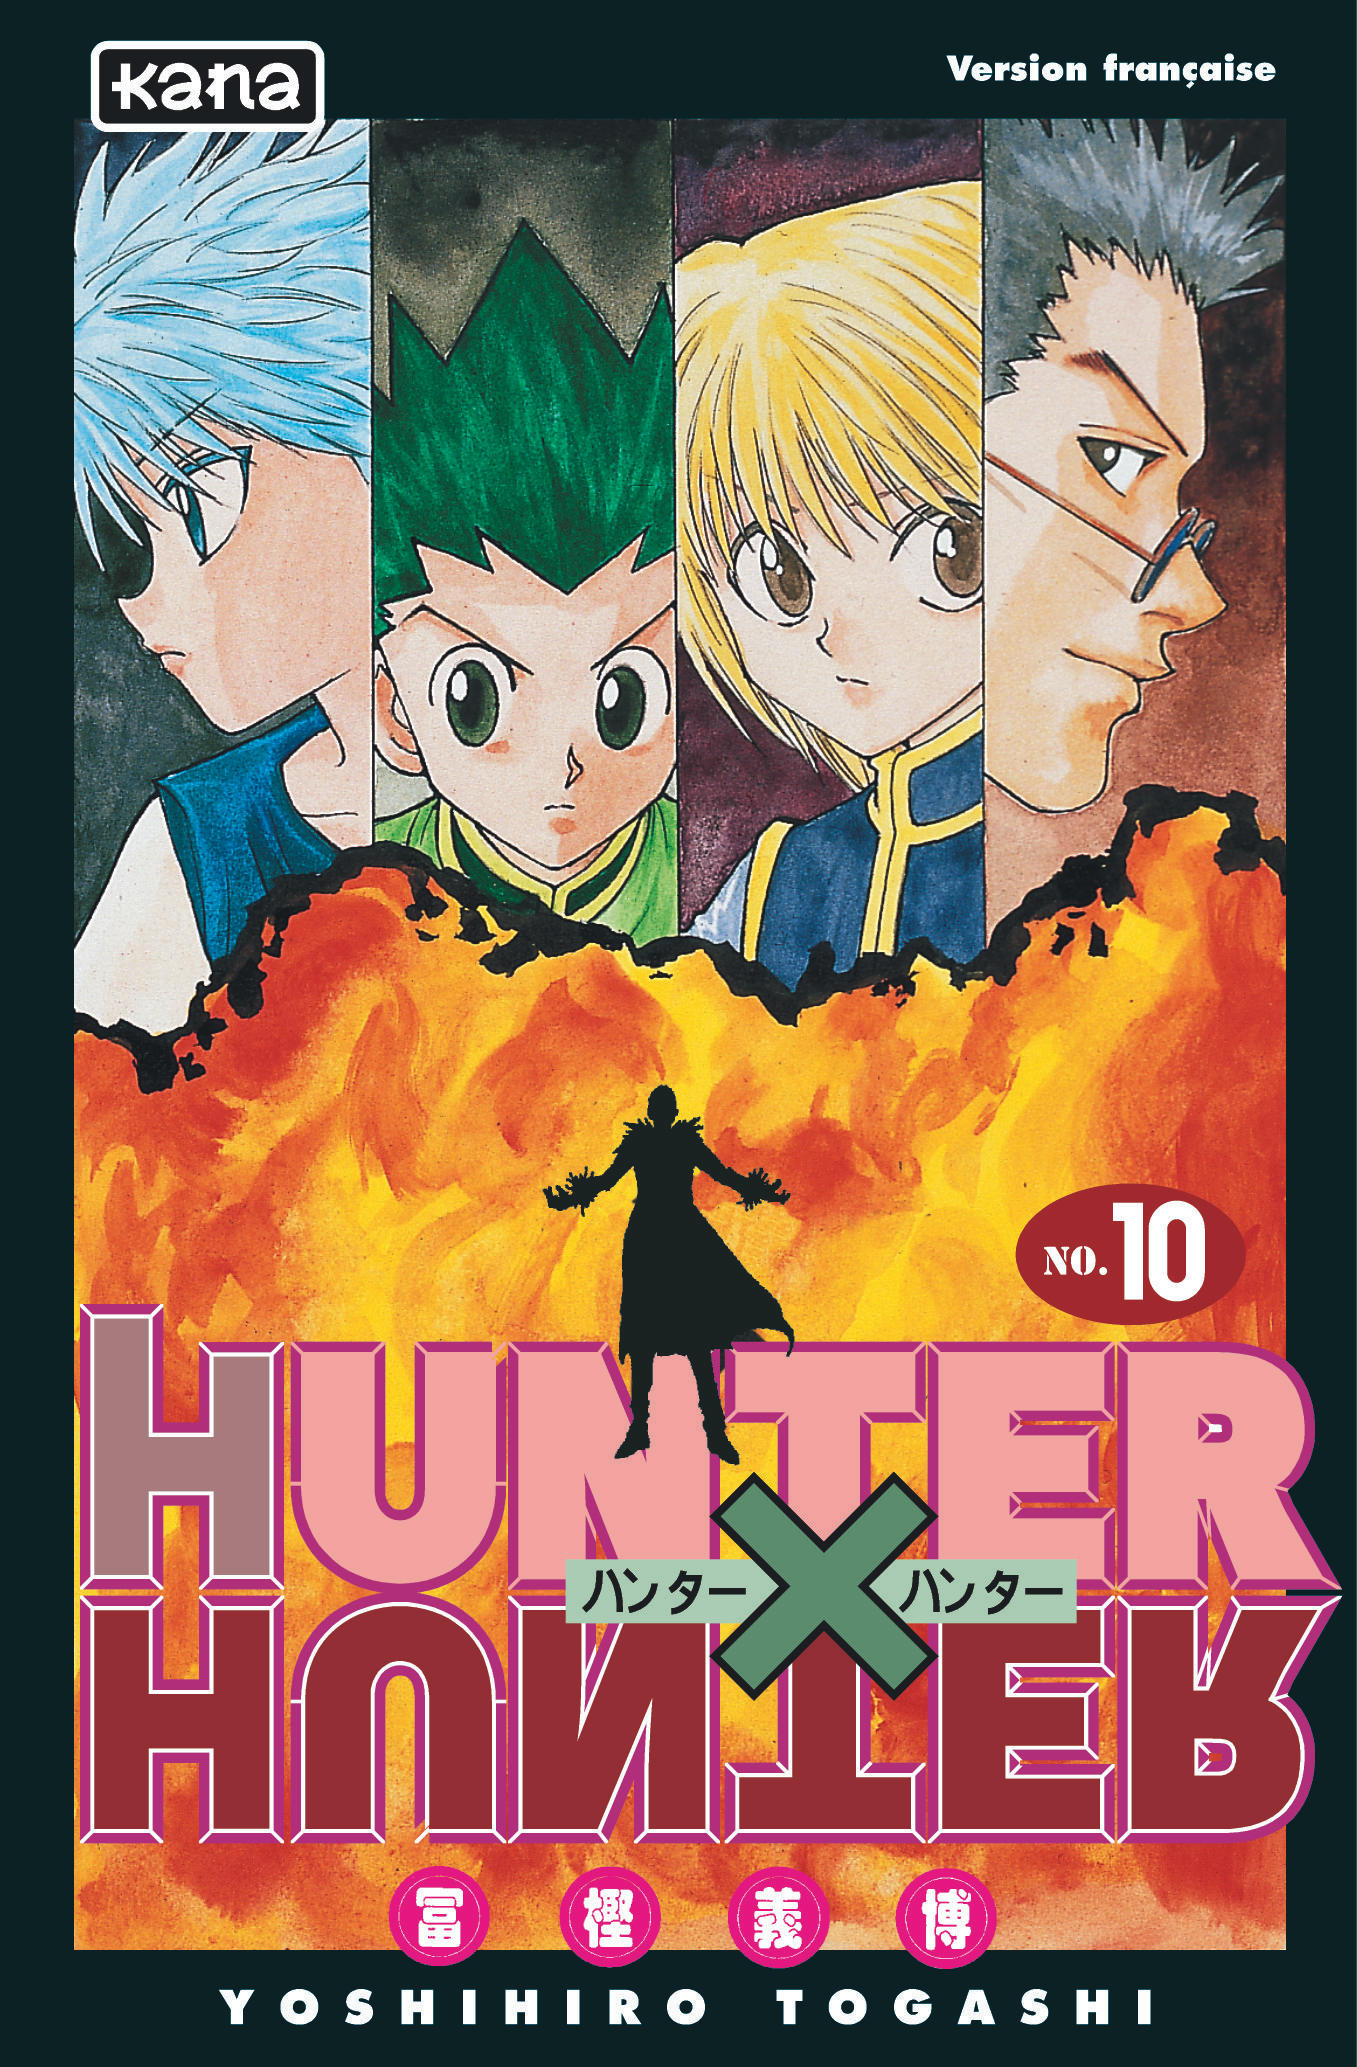 Couverture Tome 10 - HUNTER X HUNTER © POT (Yoshihiro Togashi) 1998-2018. All rights reserved.